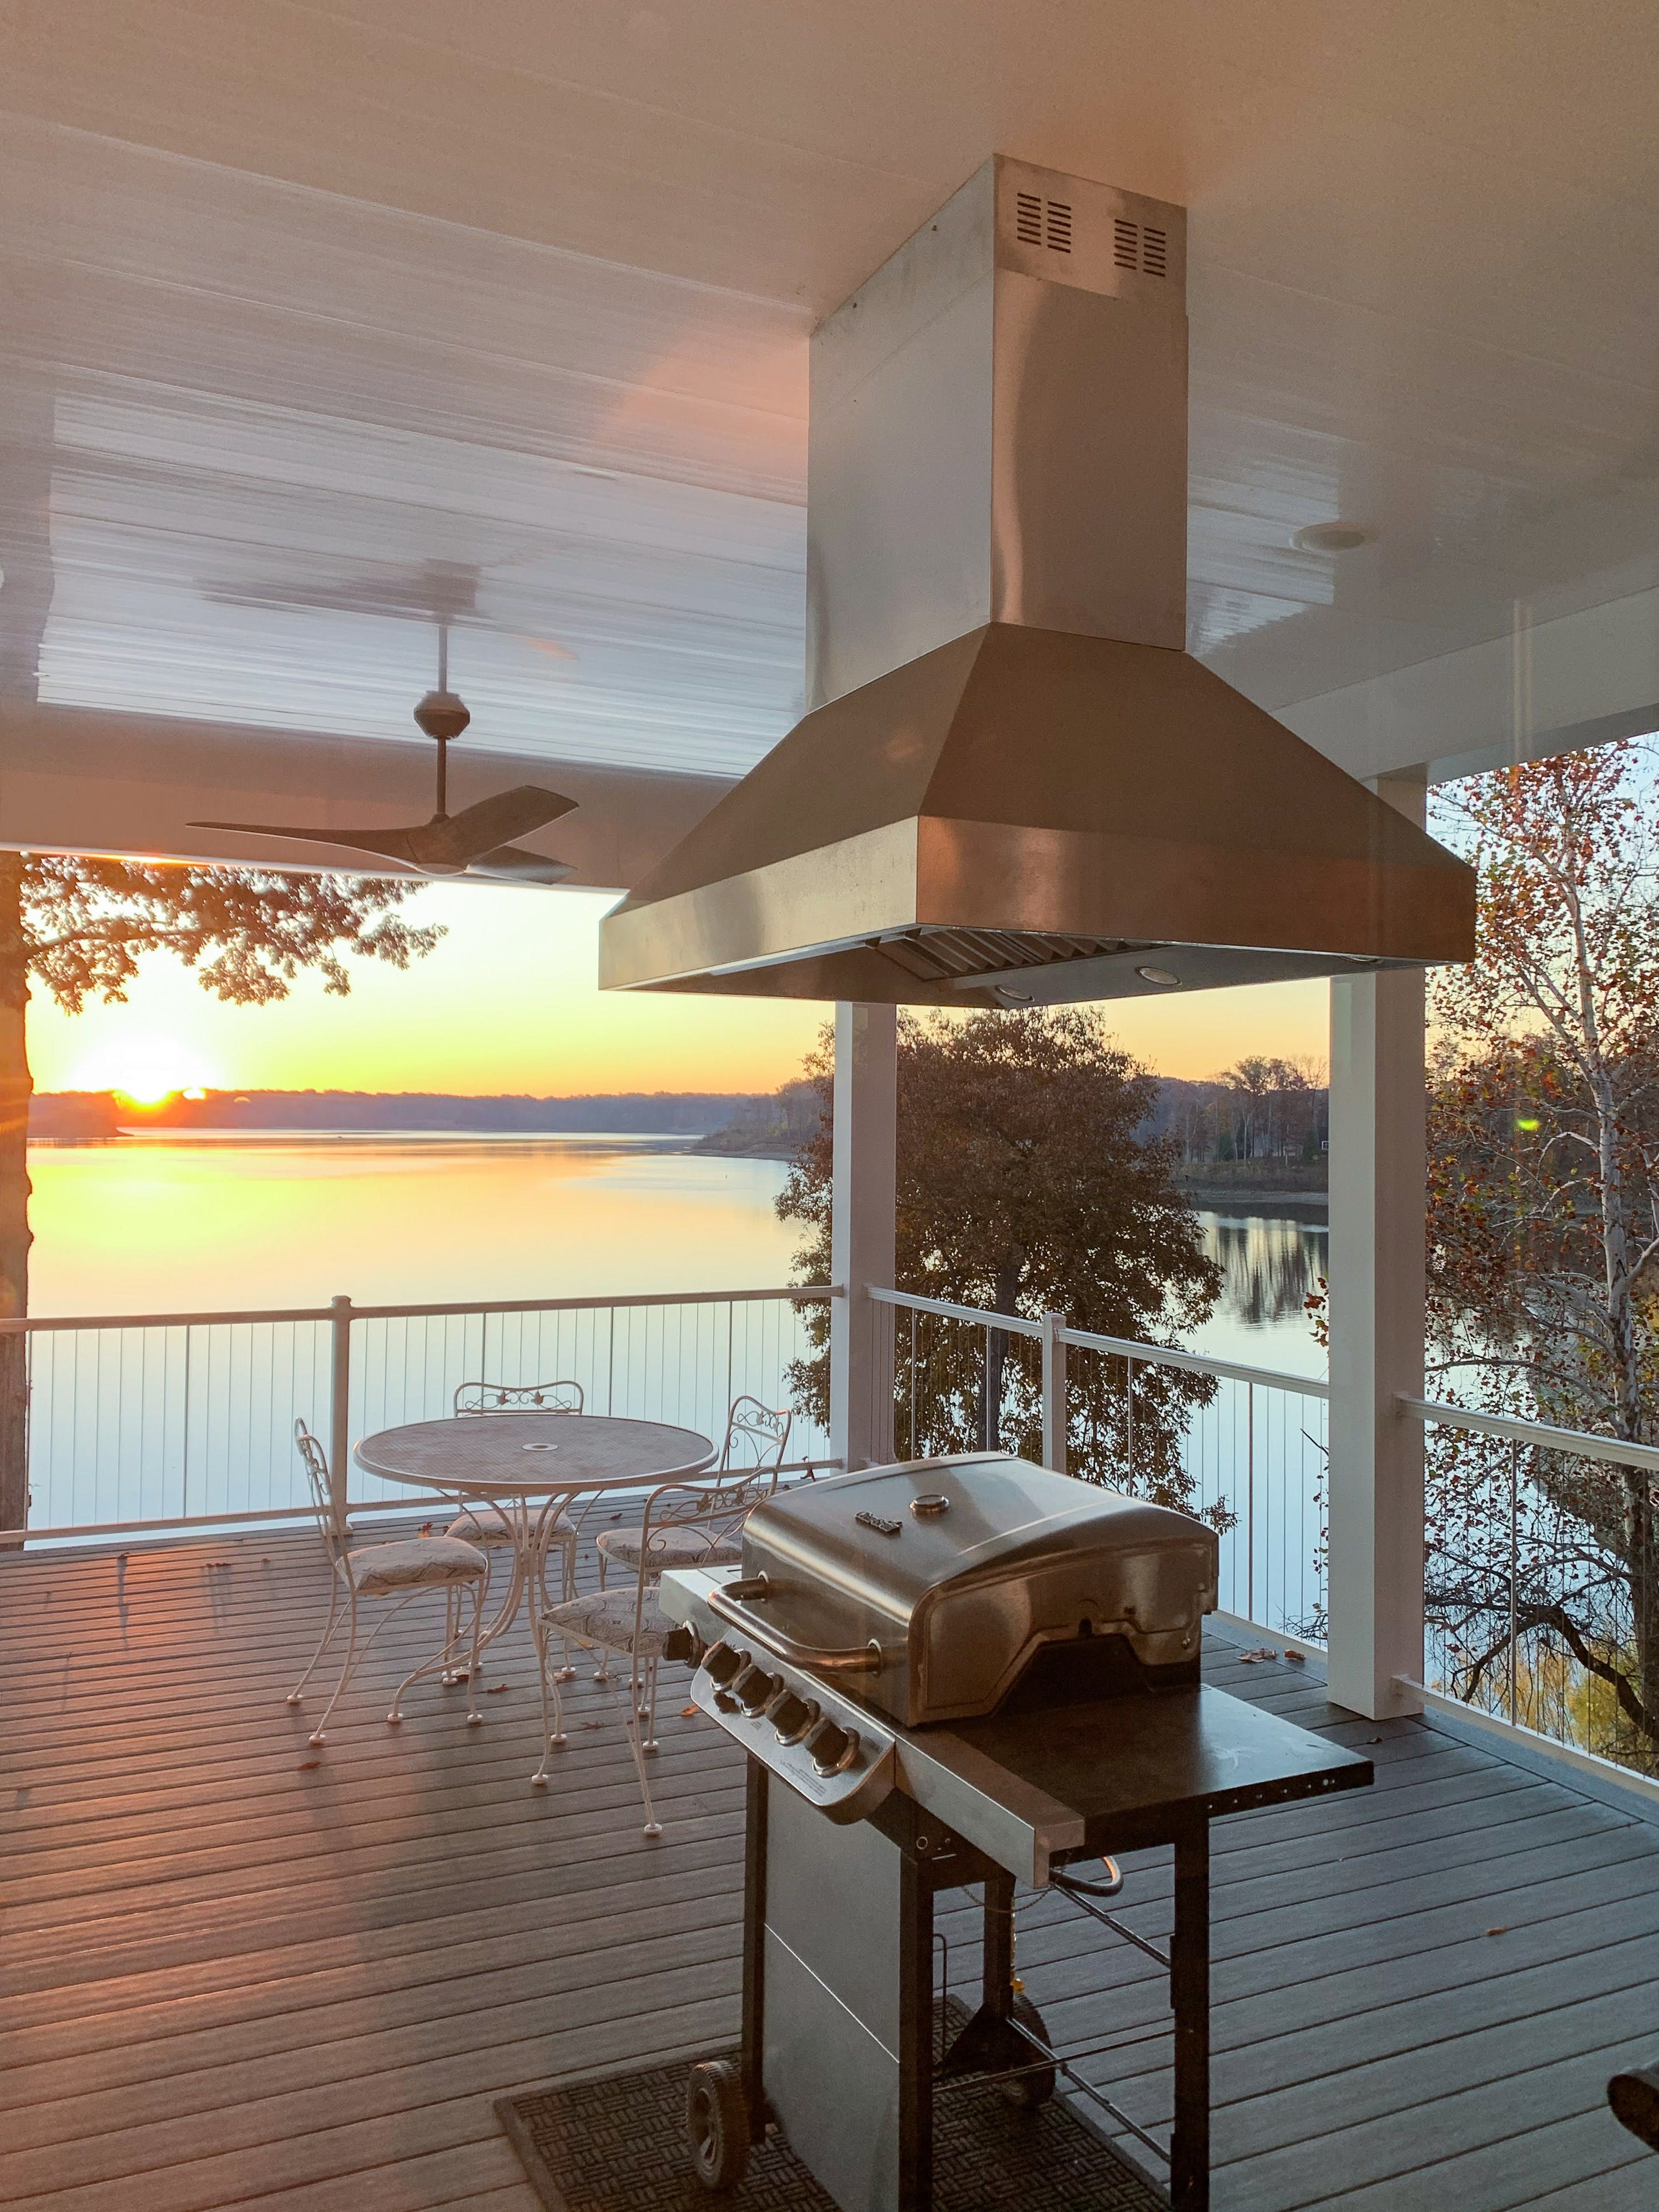 Lakeside Grilling Retreat: Proline hood vents smoke in this serene outdoor kitchen with a minimalist design. Modern hood complements rustic charm and offers clear lake views. Perfect for peaceful grilling and enjoying sunsets. - Proline Range Hoods - prolinerangehoods.com 